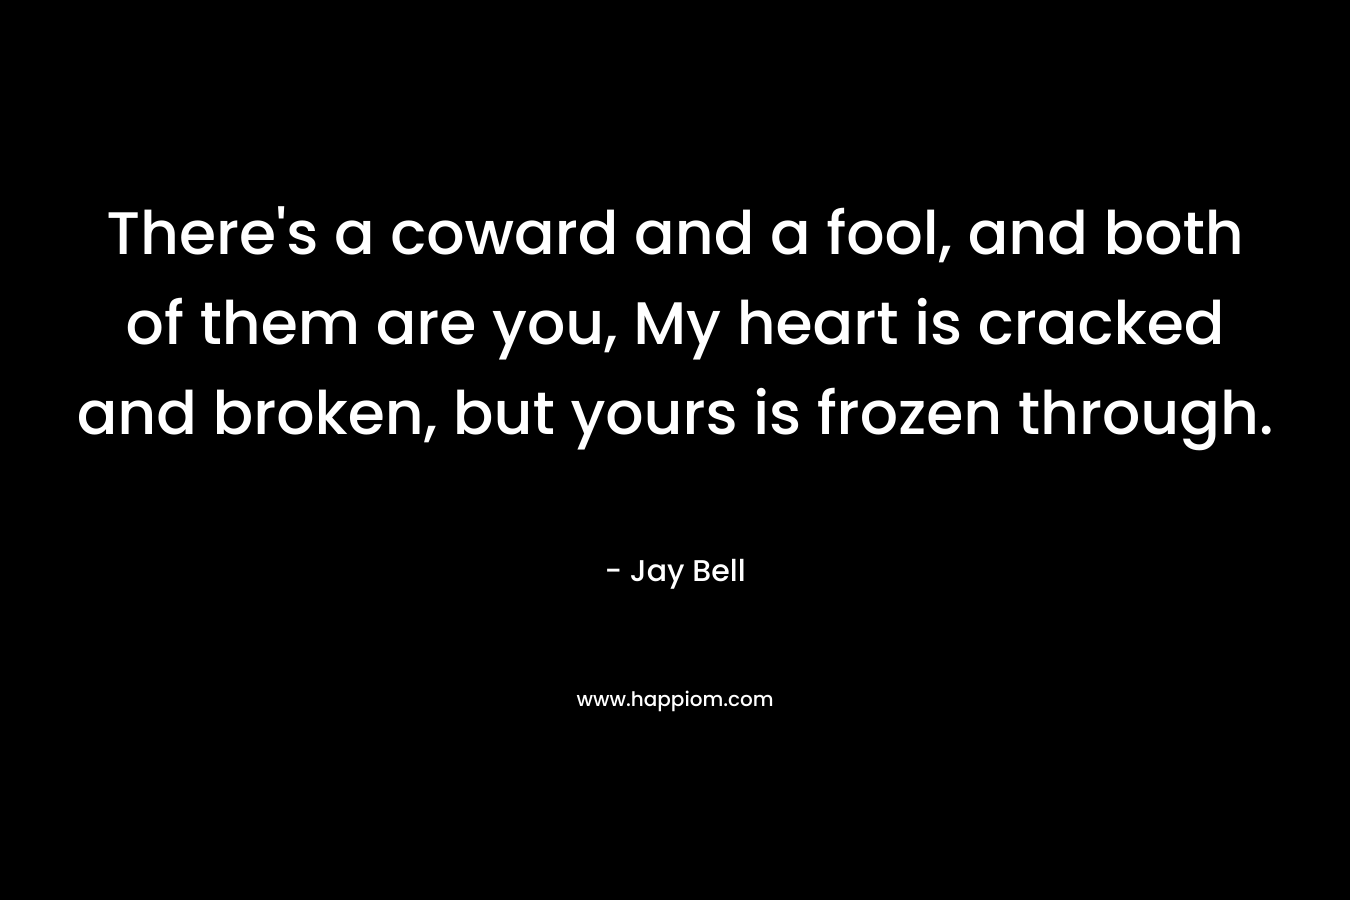 There’s a coward and a fool, and both of them are you, My heart is cracked and broken, but yours is frozen through. – Jay Bell